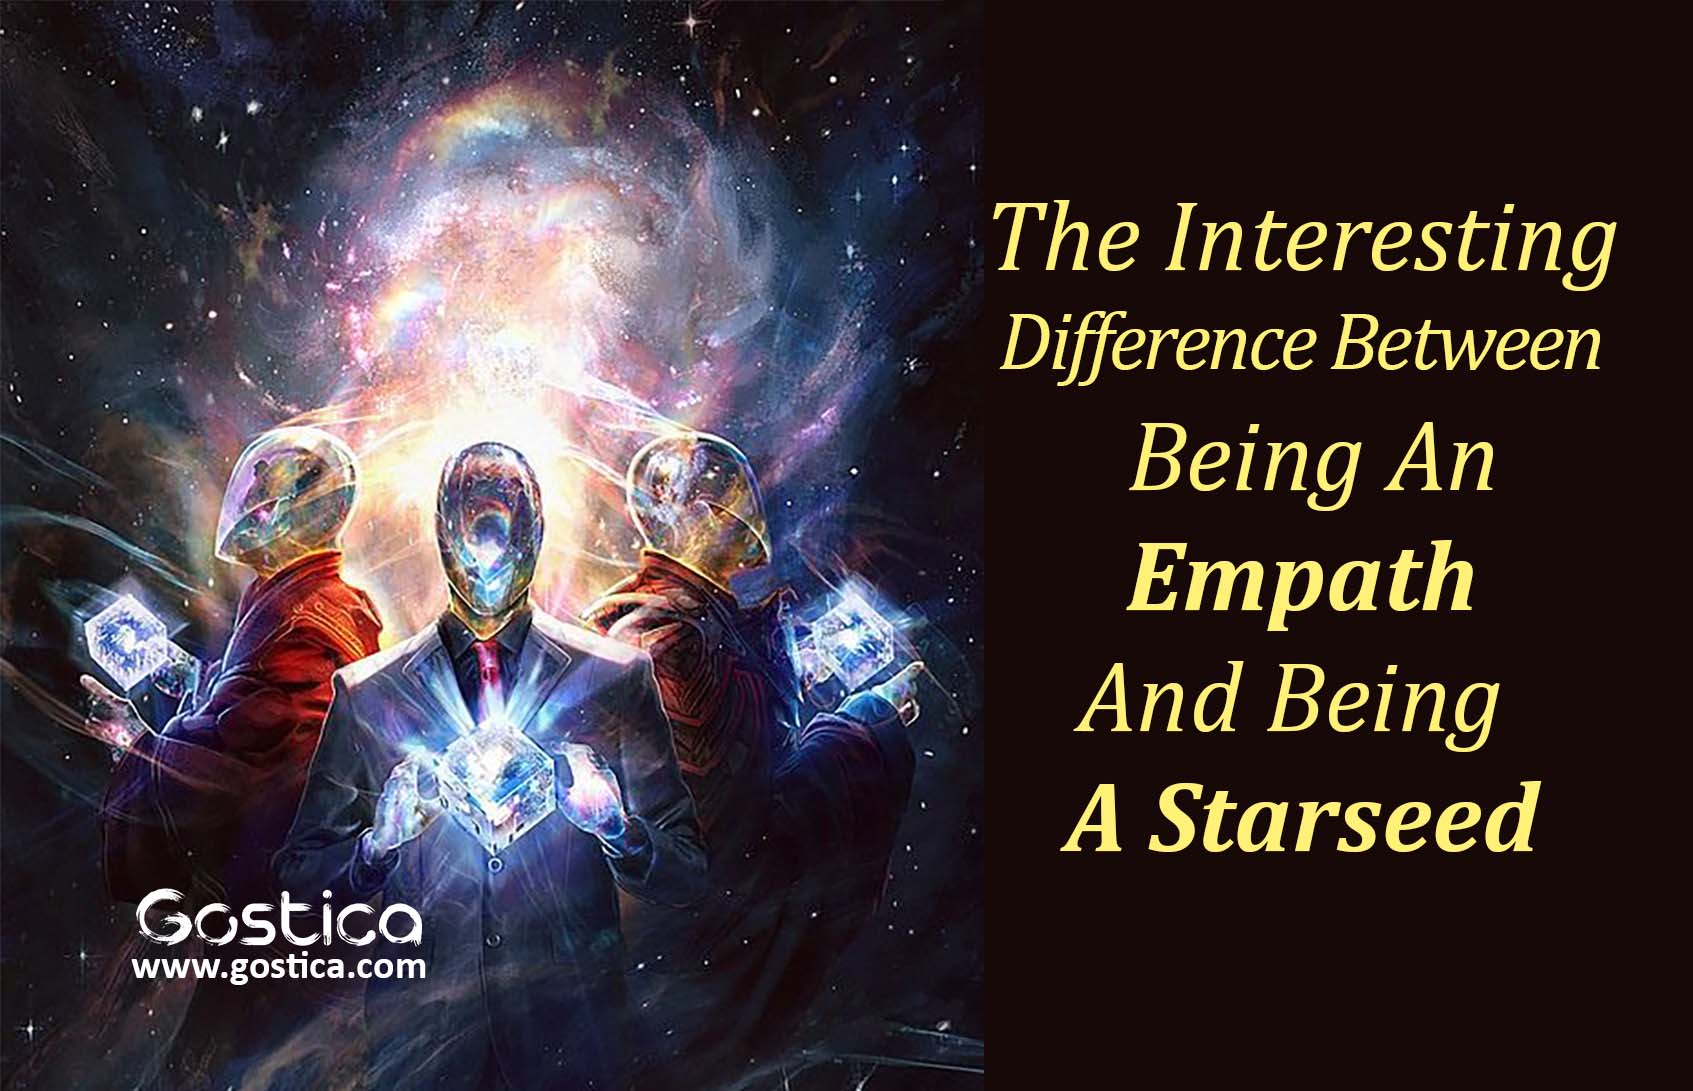 The-Interesting-Difference-Between-Being-An-Empath-And-Being-A-Starseed.jpg